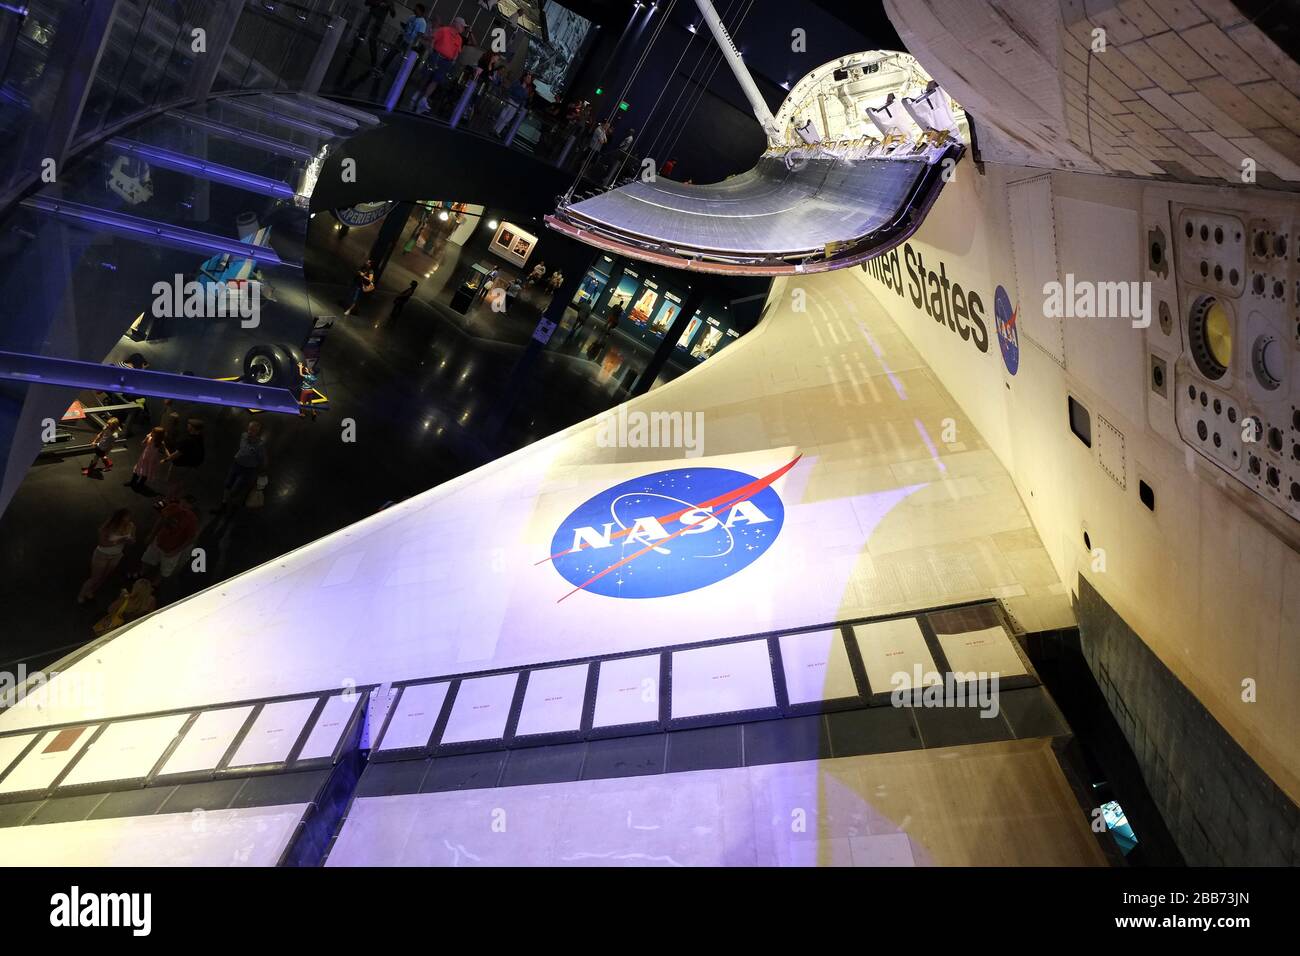 October 2014 - Space shuttle Atlantis at the Kennedy Space Centre in Florida Stock Photo